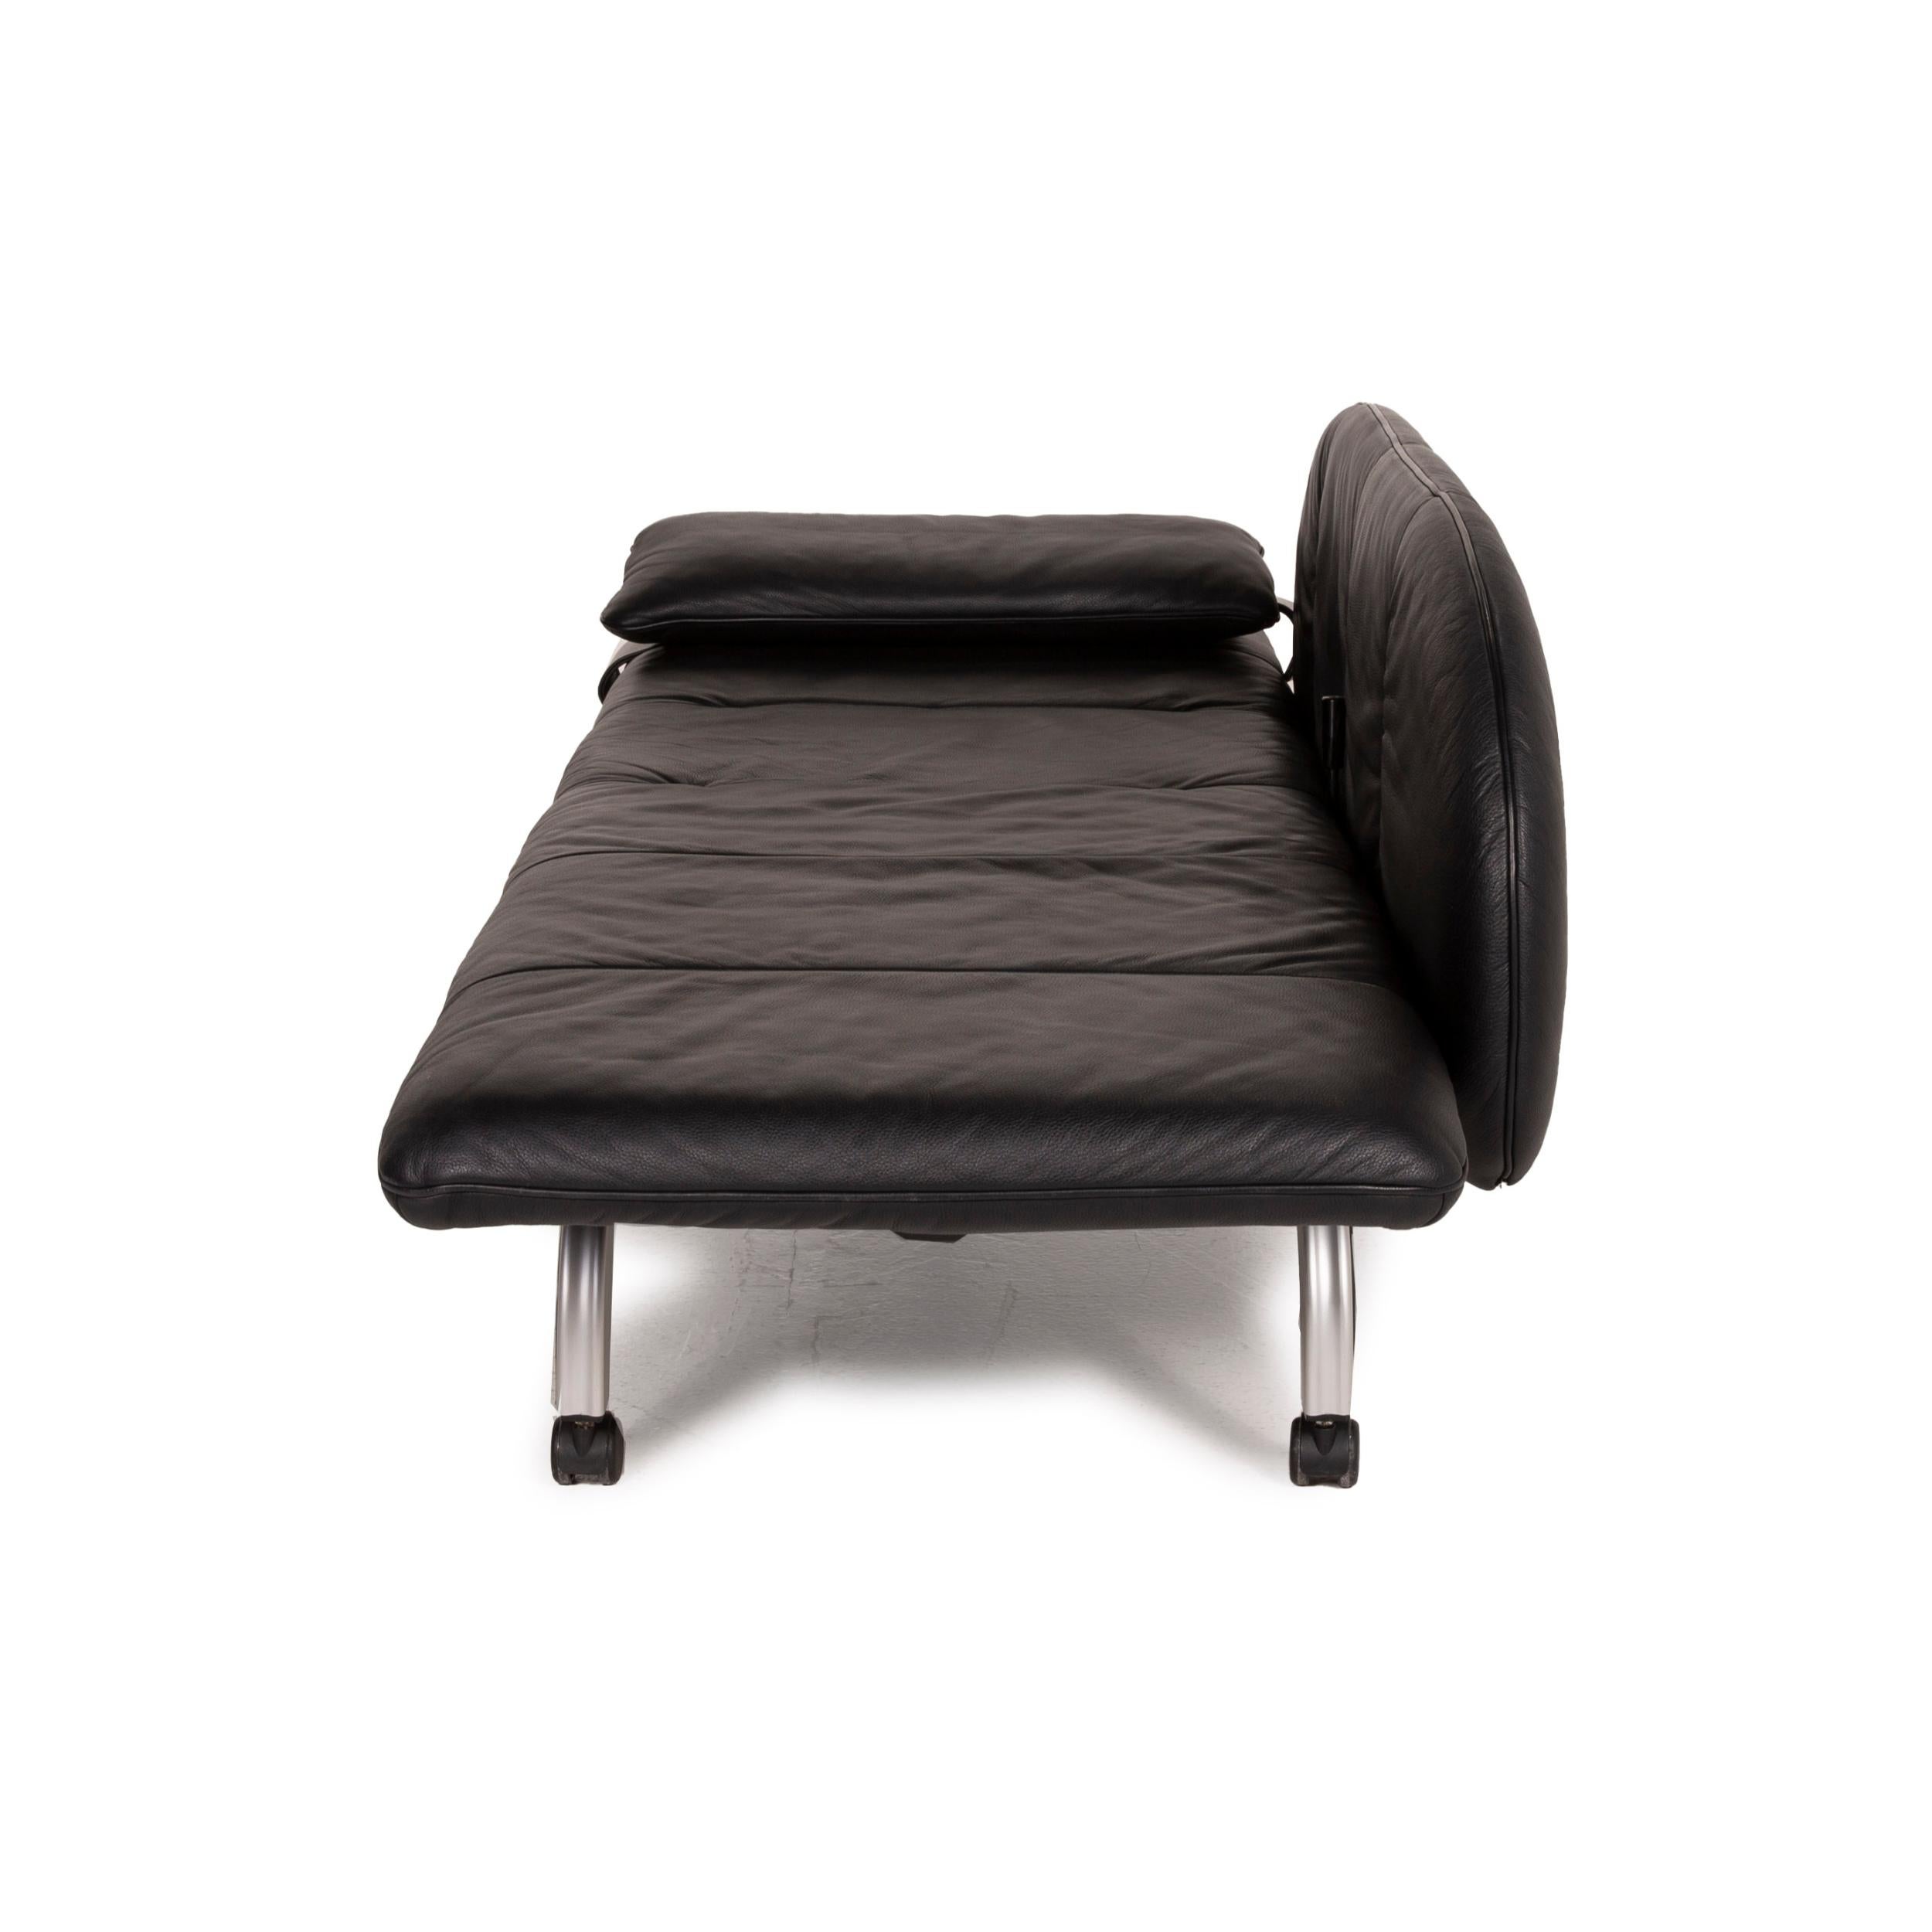 Interprofil Beo Leather Lounger Black Function Two-Seater 5